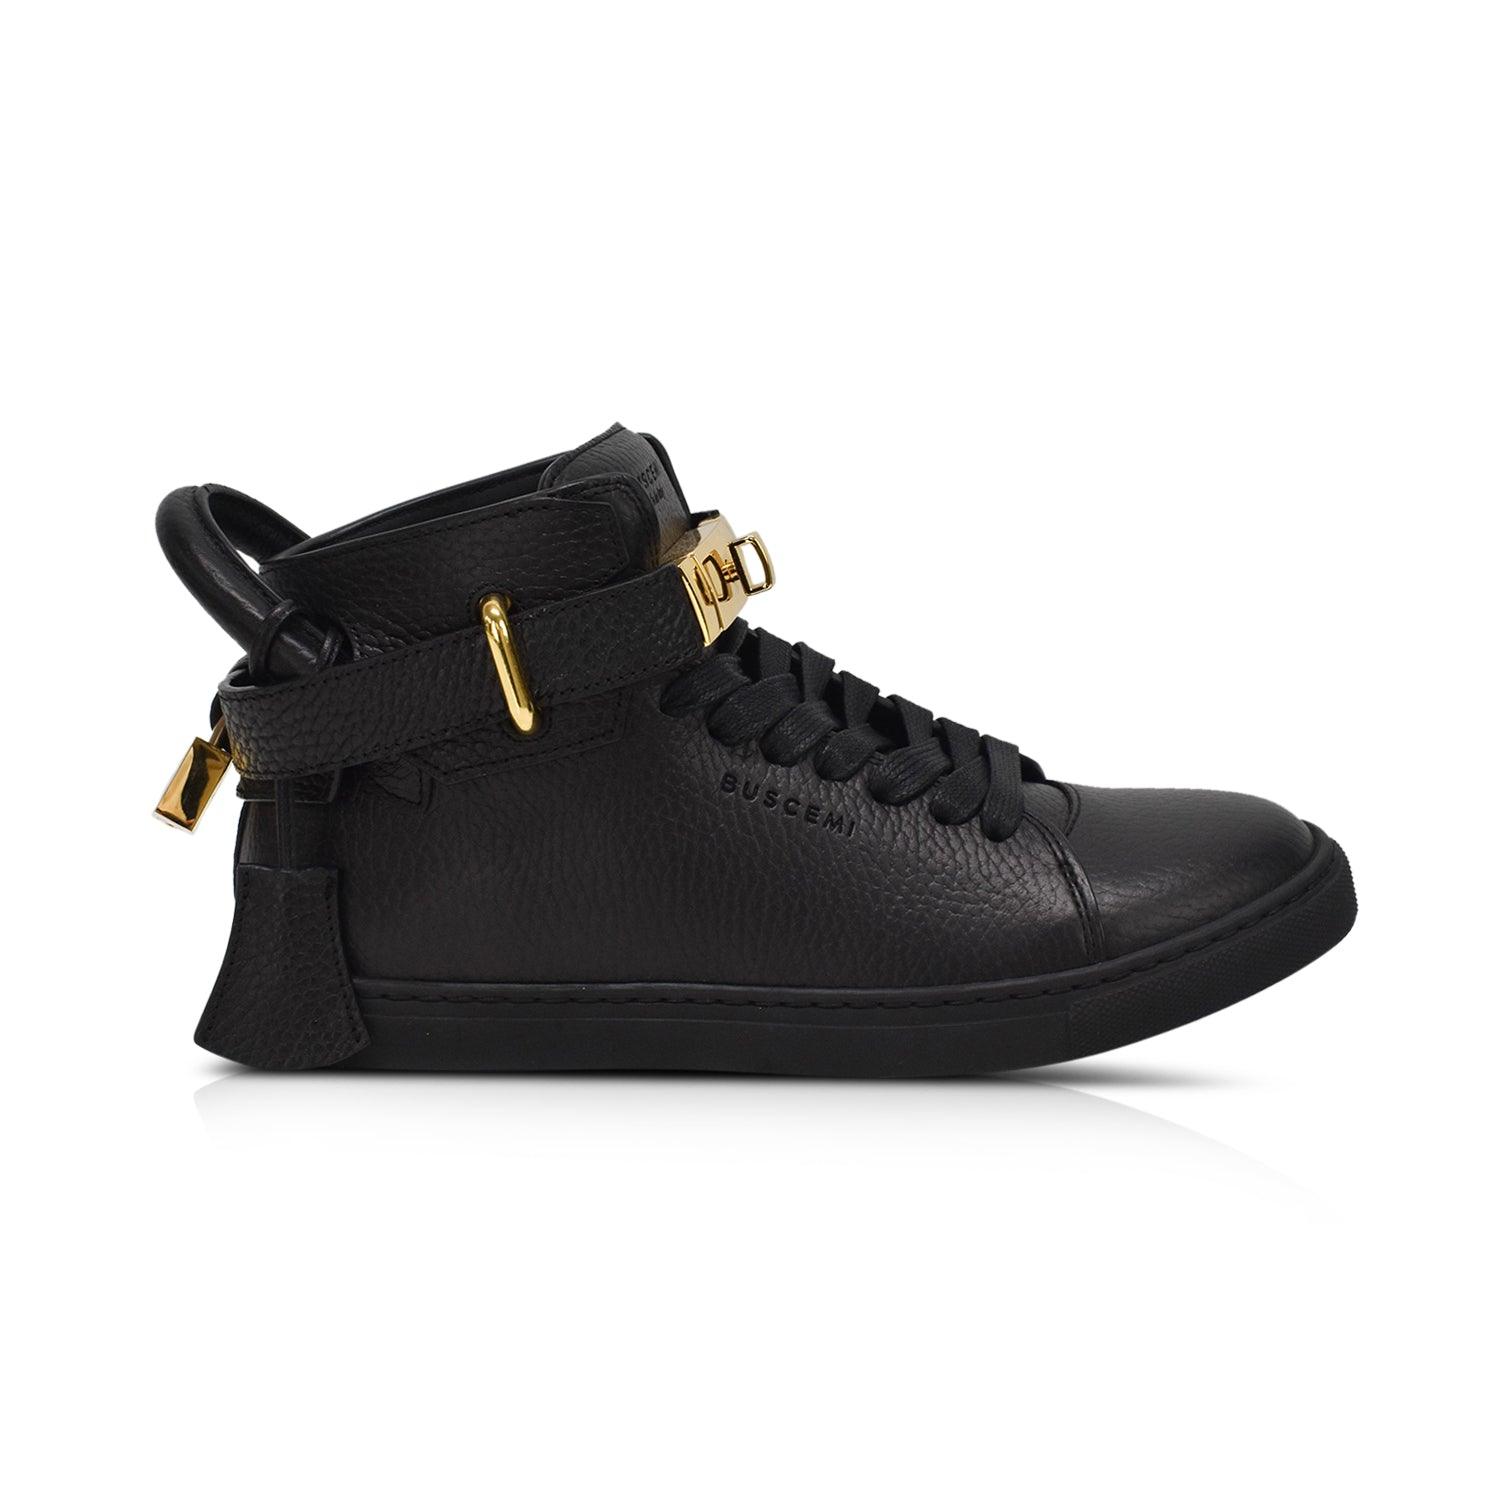 Buscemi Sneakers - Women's 37 - Fashionably Yours